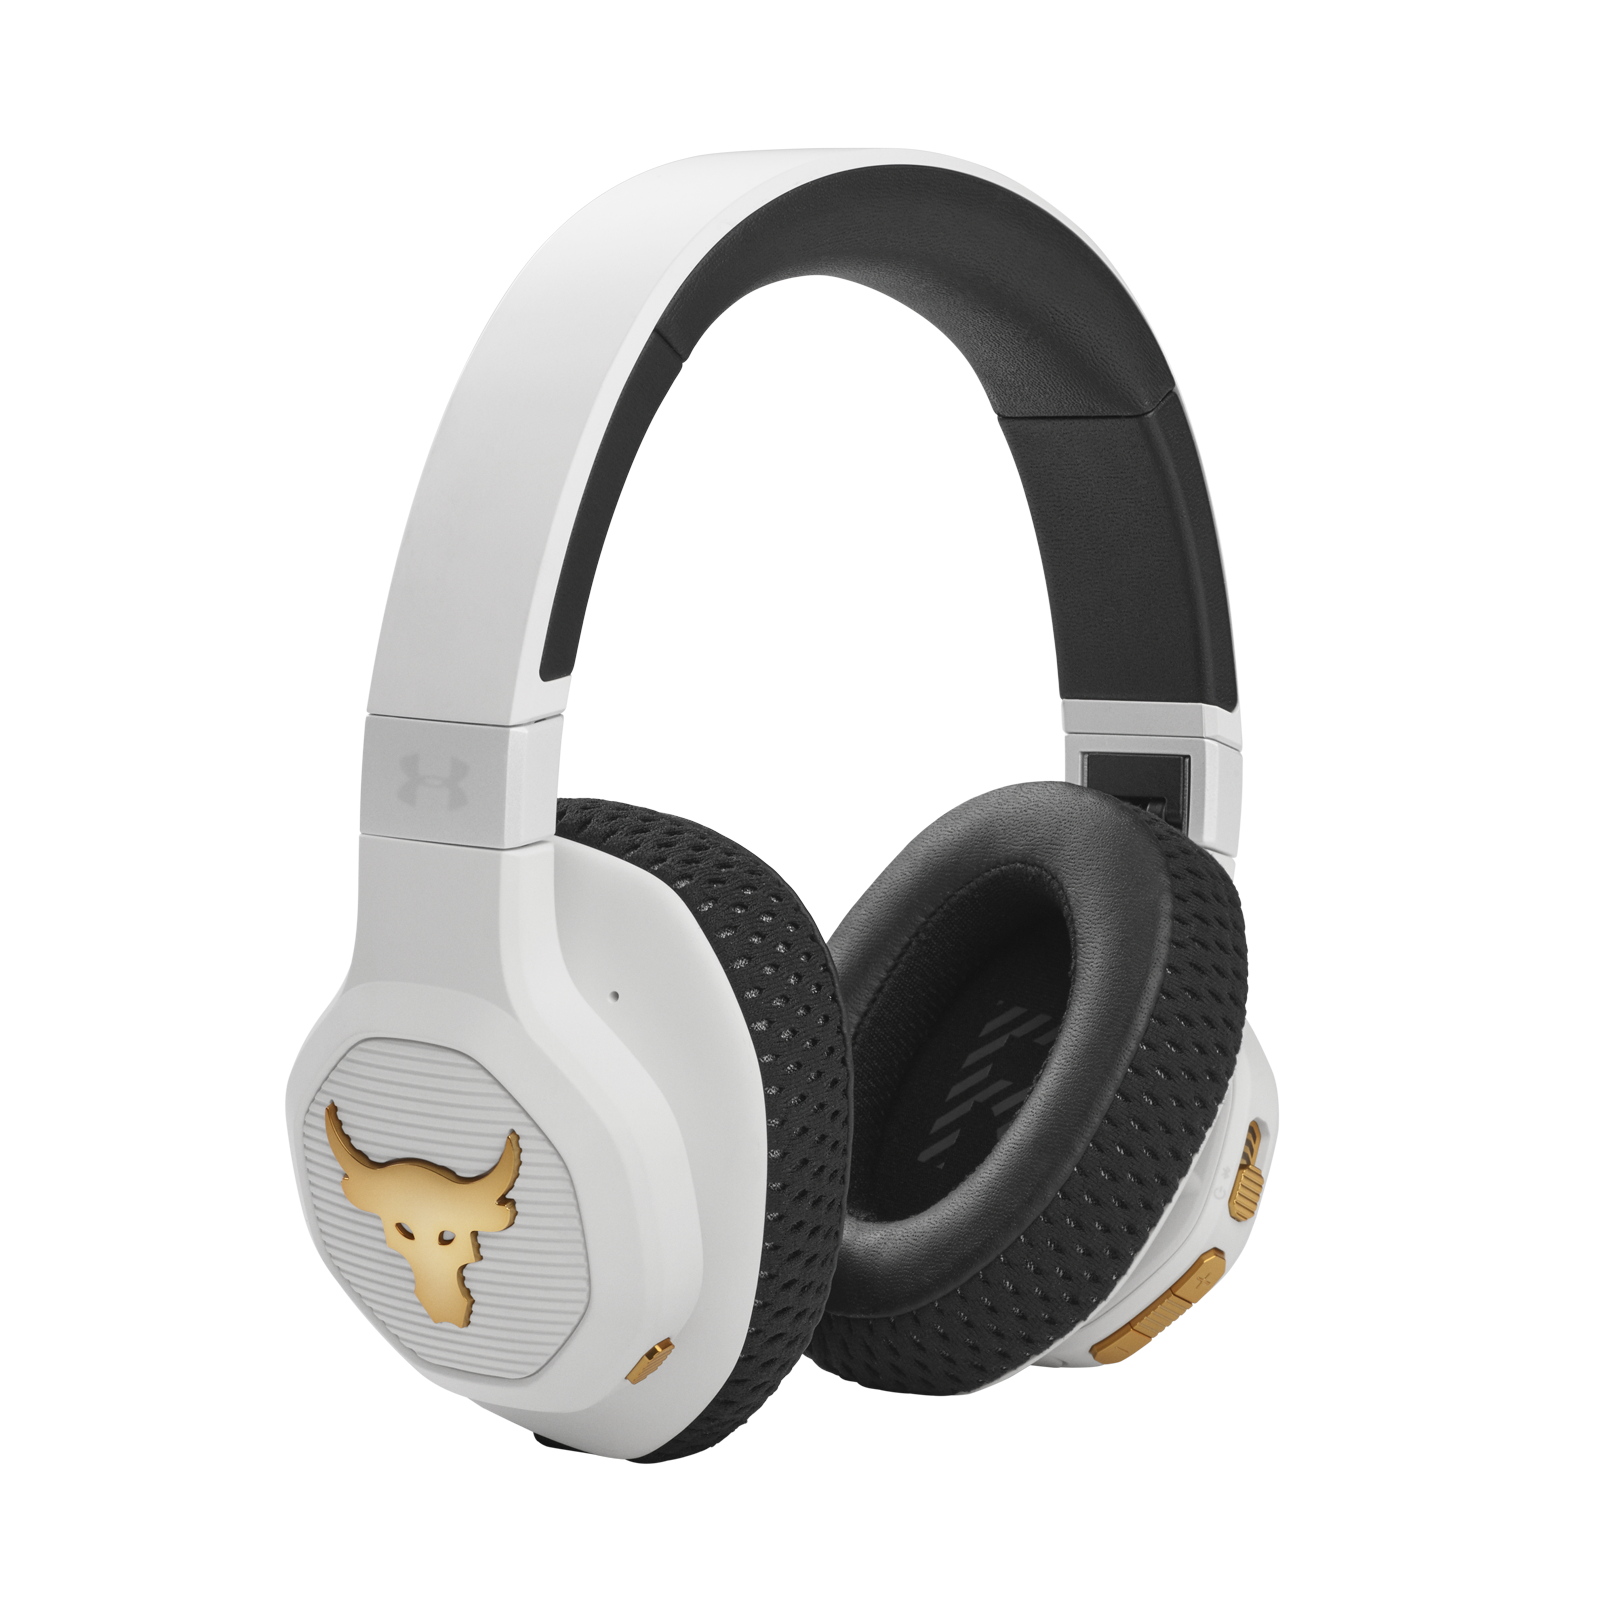 UA Project Rock Over-Ear Training Headphones - Engineered by JBL - White - Over-Ear ANC Sport Headphones - Right